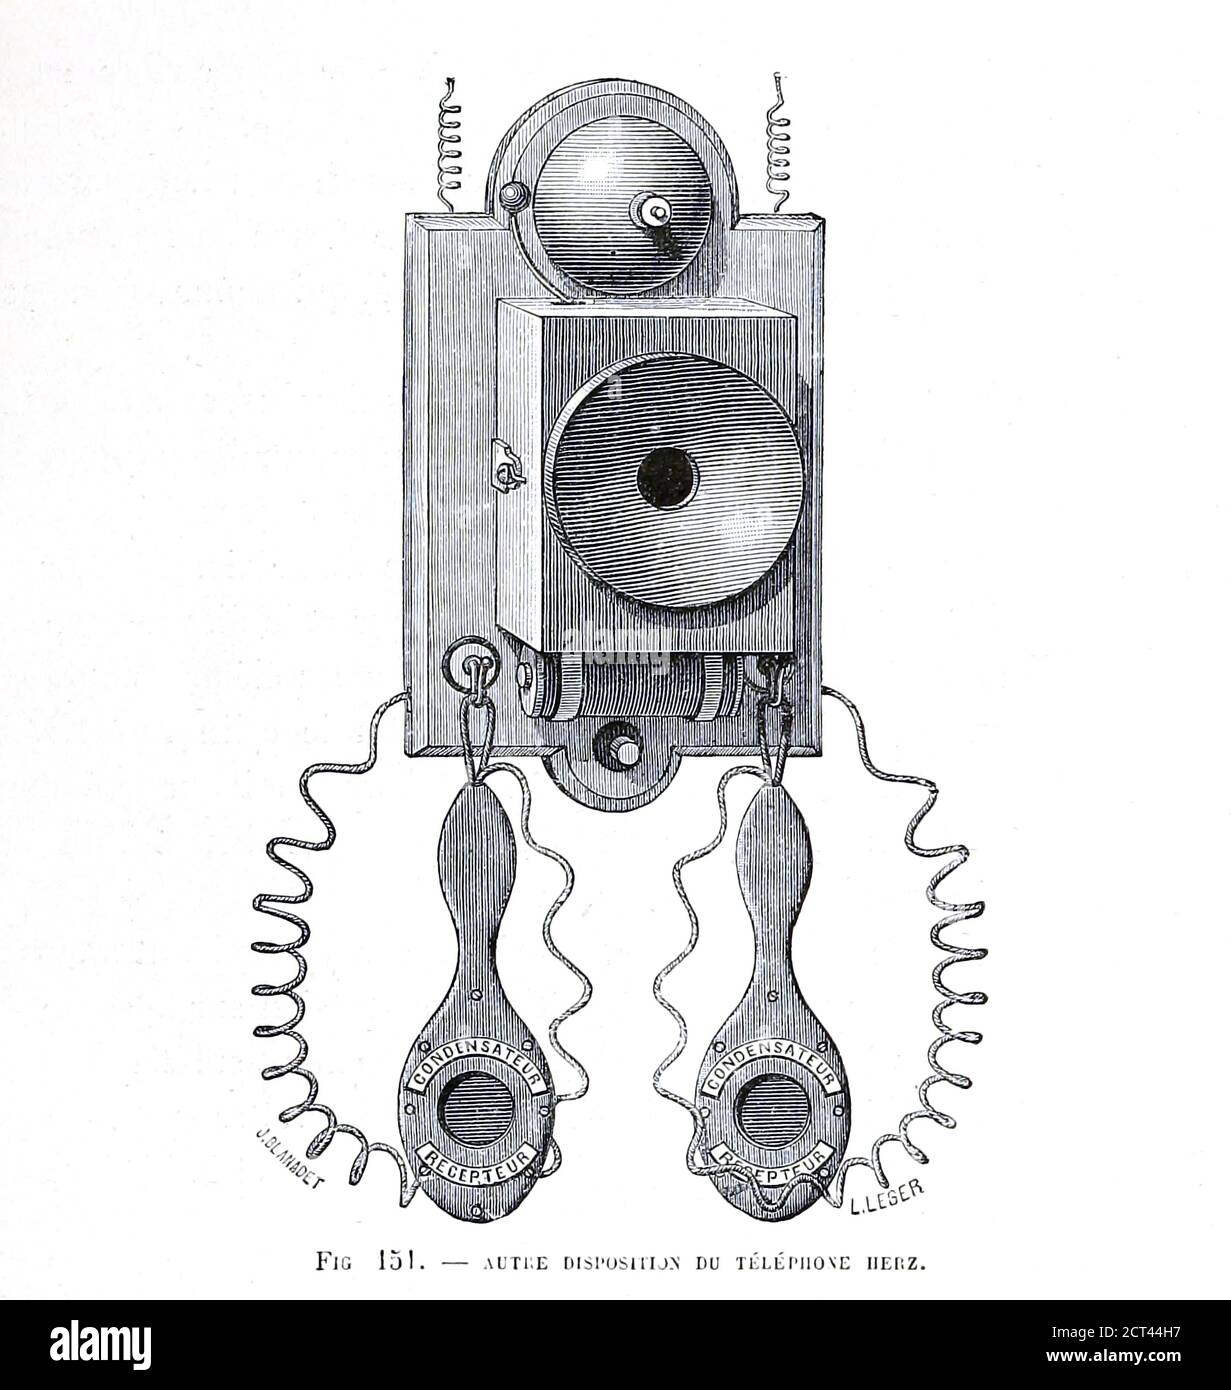 late nineteenth century inventions